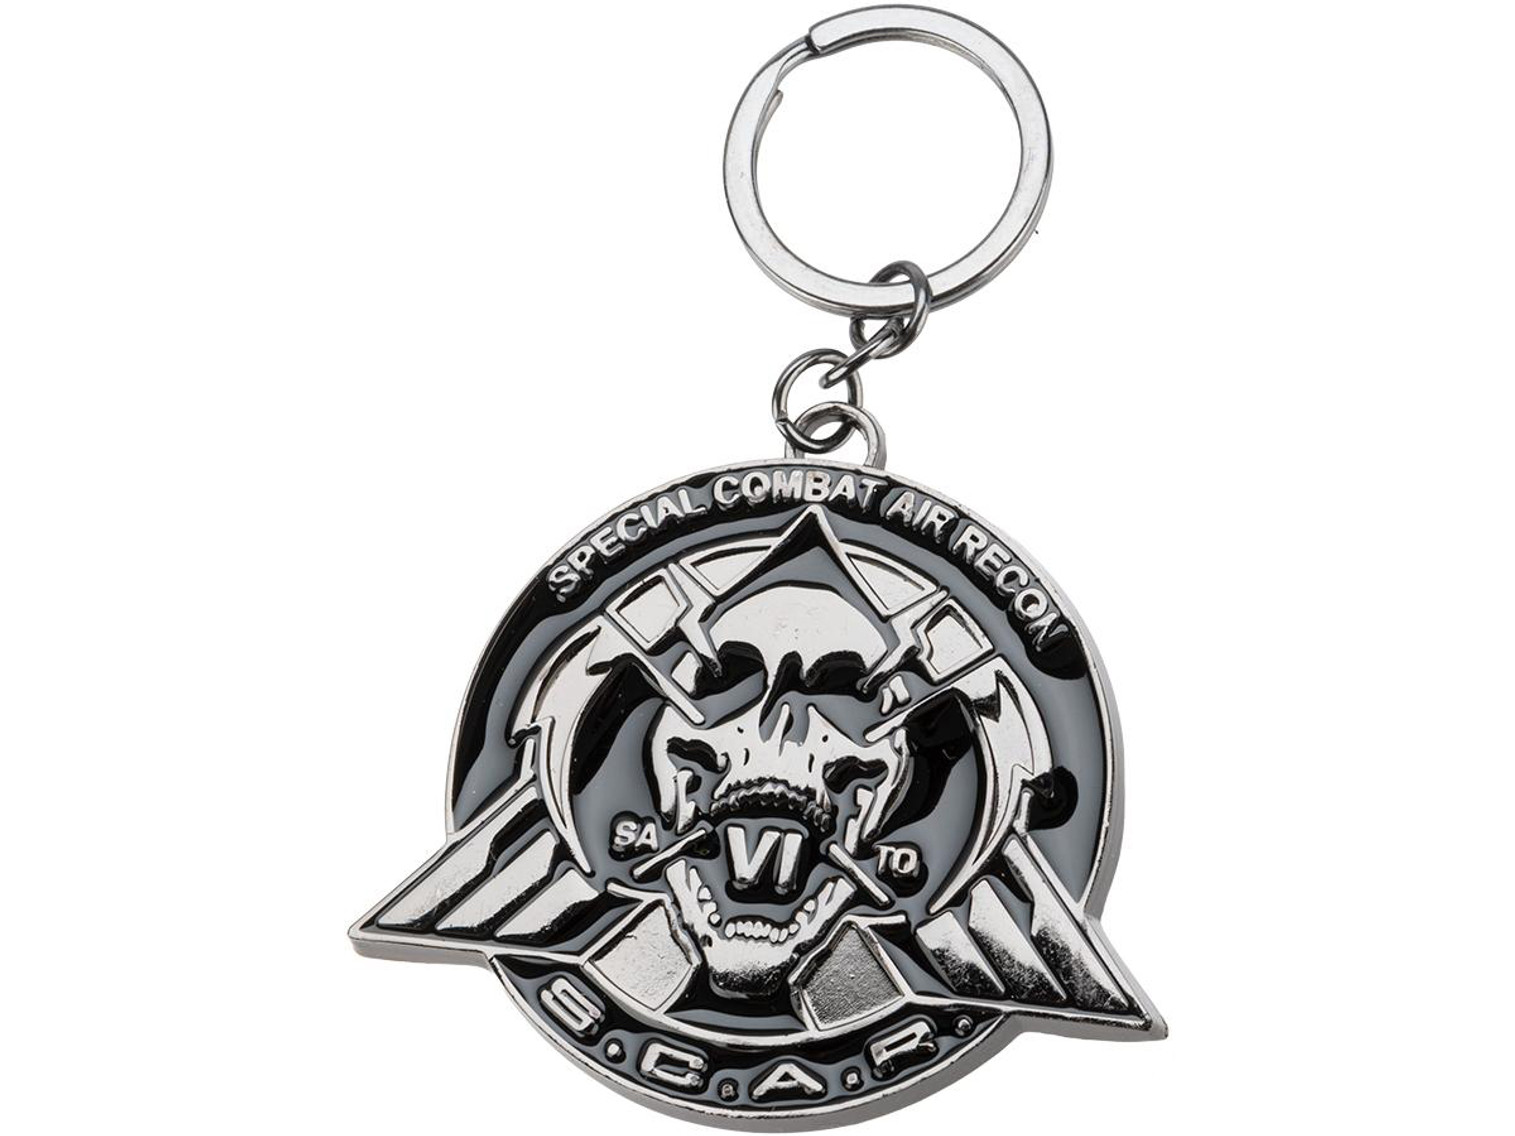 Call of Duty Infinite Warfare Special Combat Air Recon S.C.A.R Metal Keychain